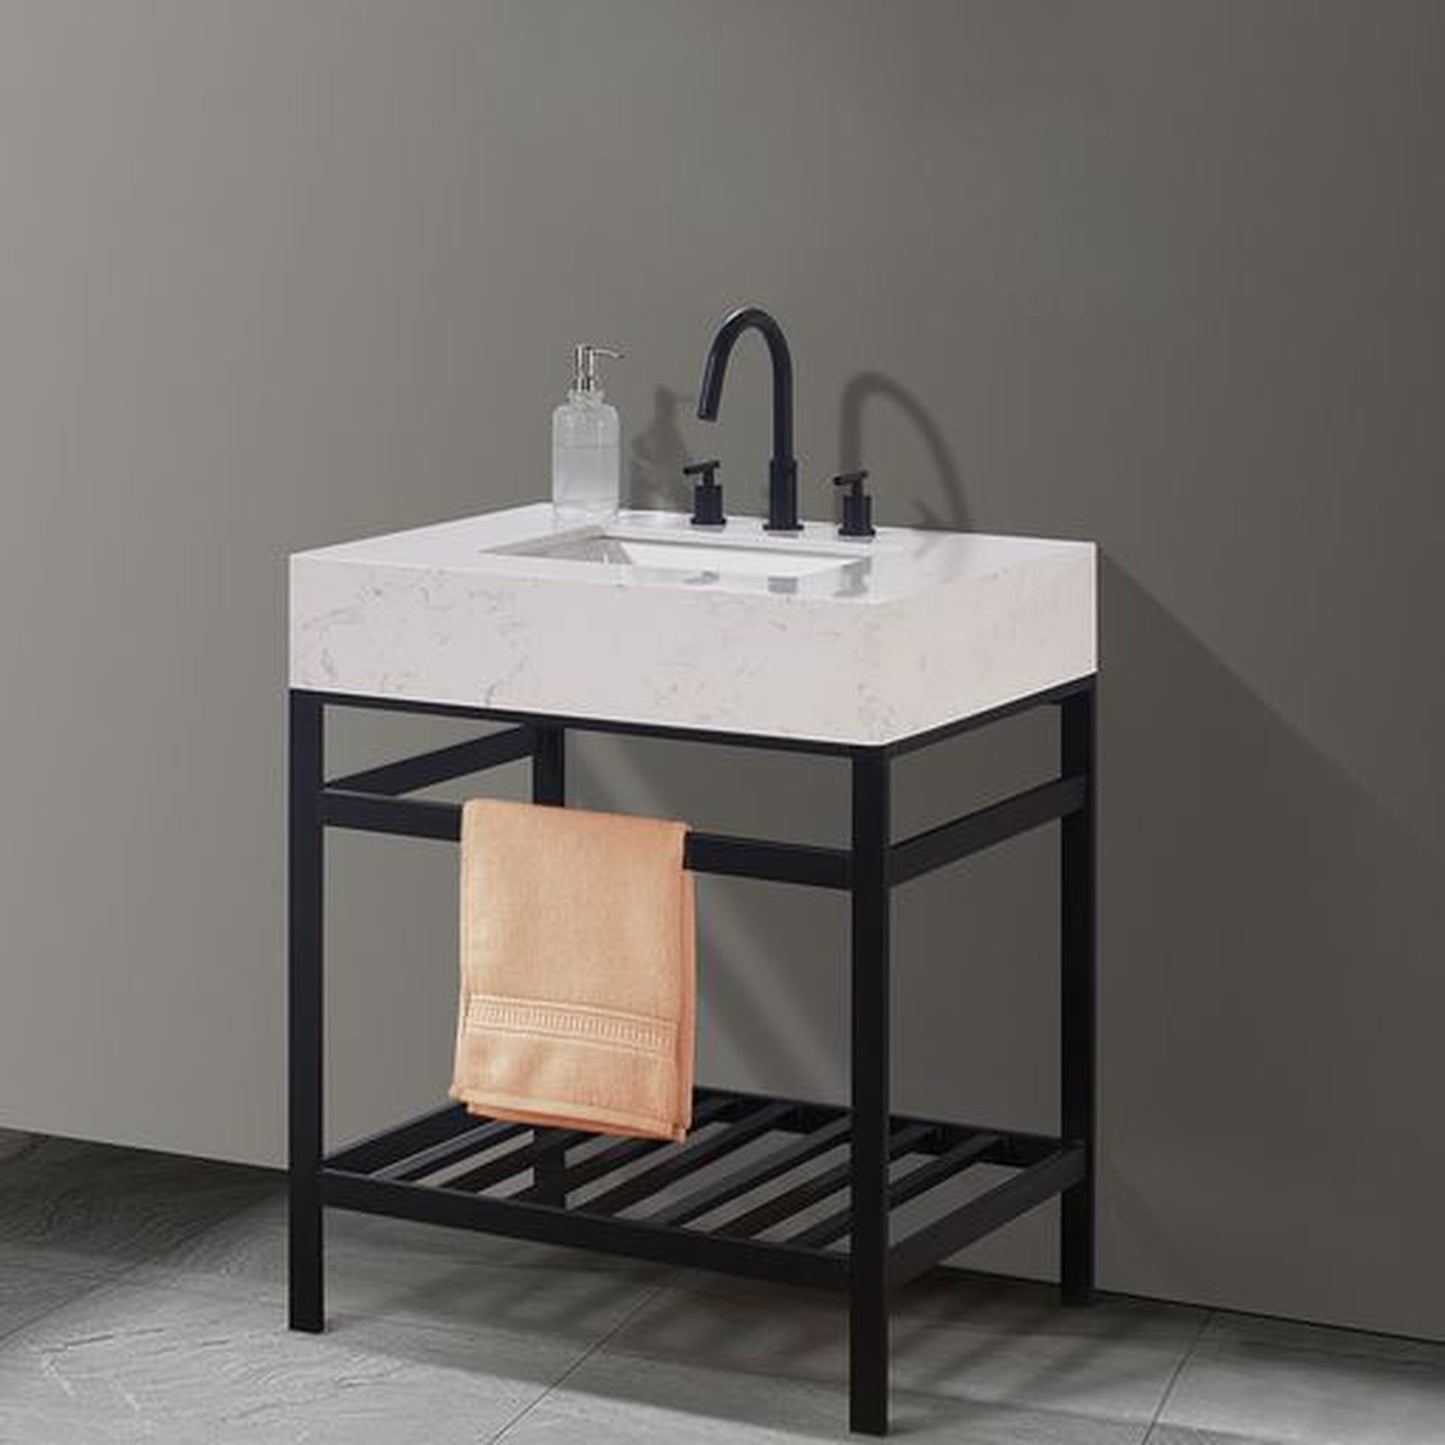 Altair Merano 30" Matte Black Single Stainless Steel Bathroom Vanity Set Console With Aosta White Stone Top, Single Rectangular Undermount Ceramic Sink, and Safety Overflow Hole